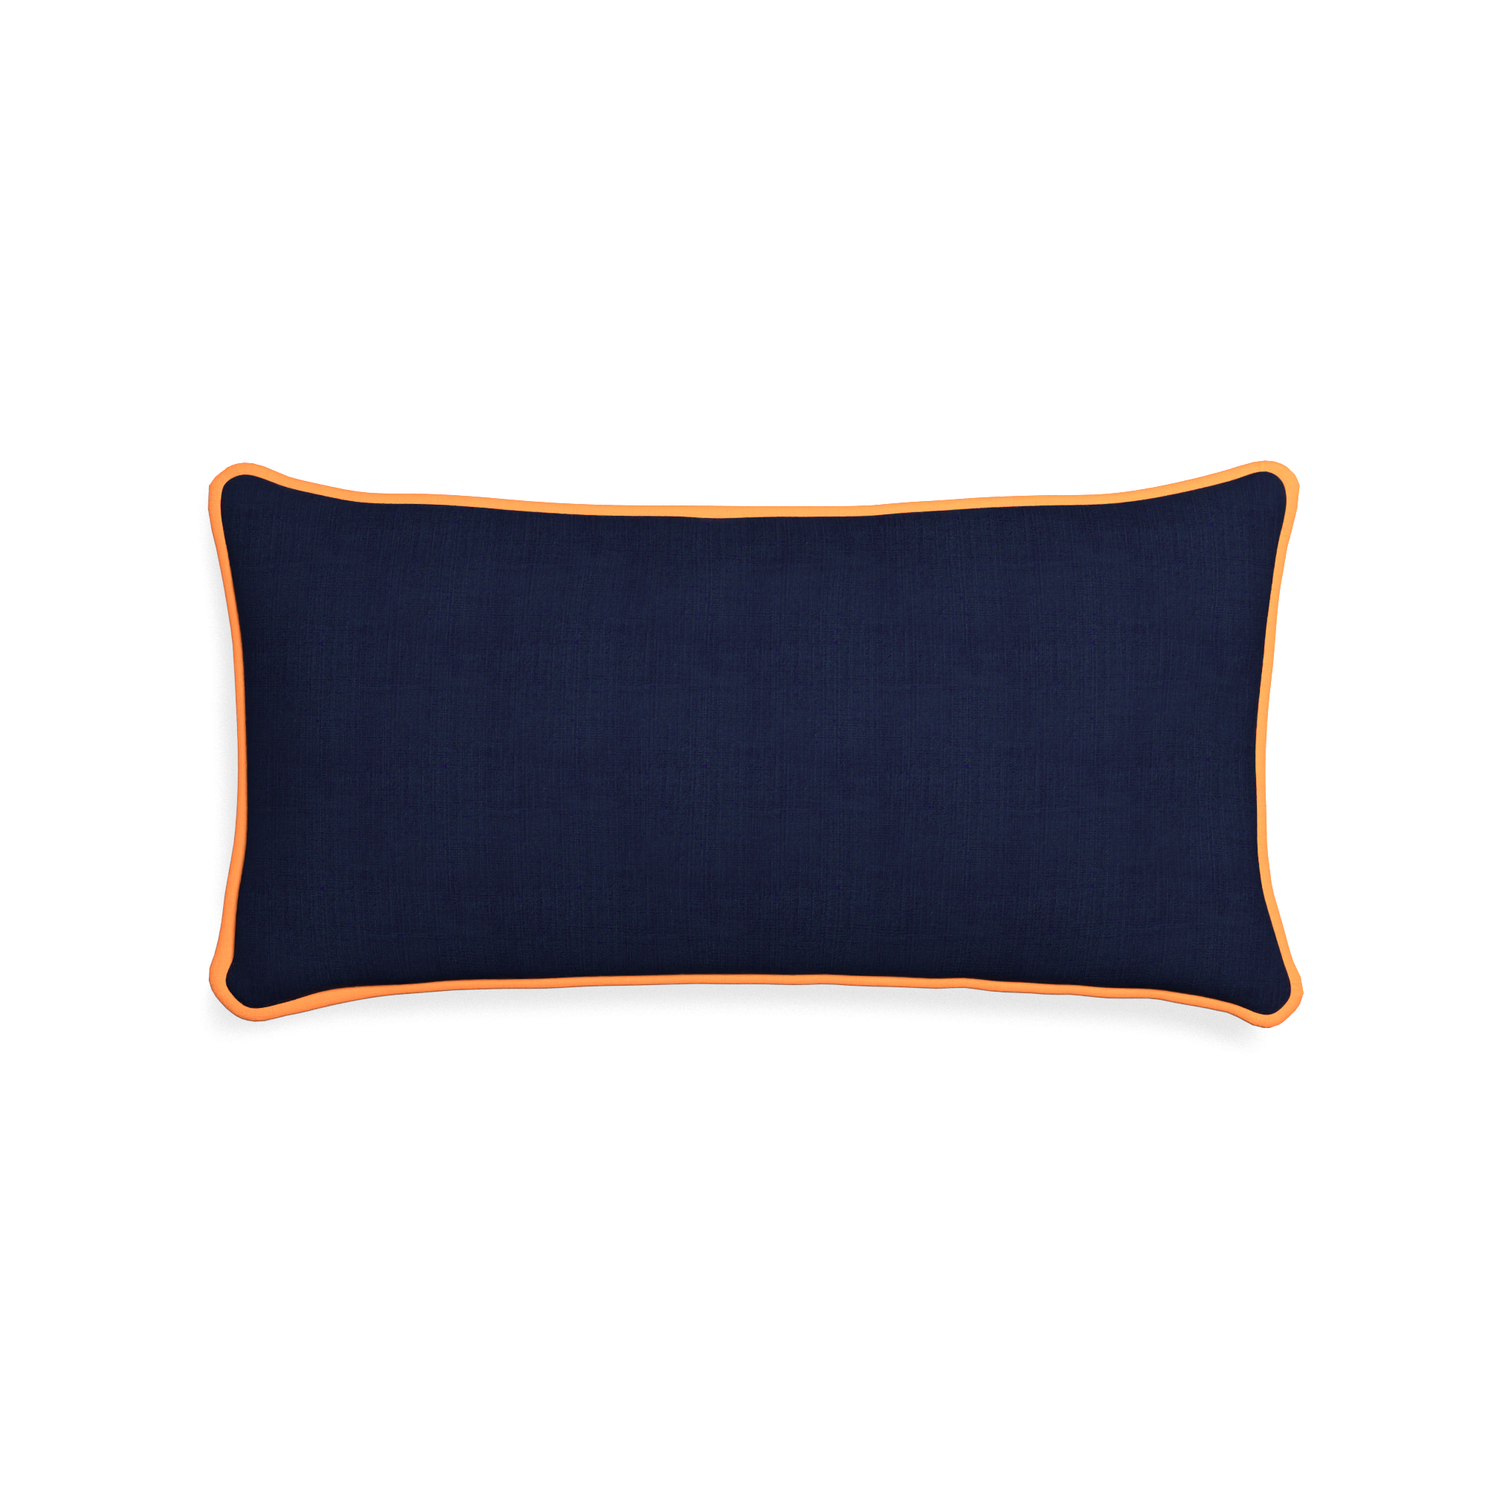 Midi-lumbar midnight custom navy bluepillow with clementine piping on white background